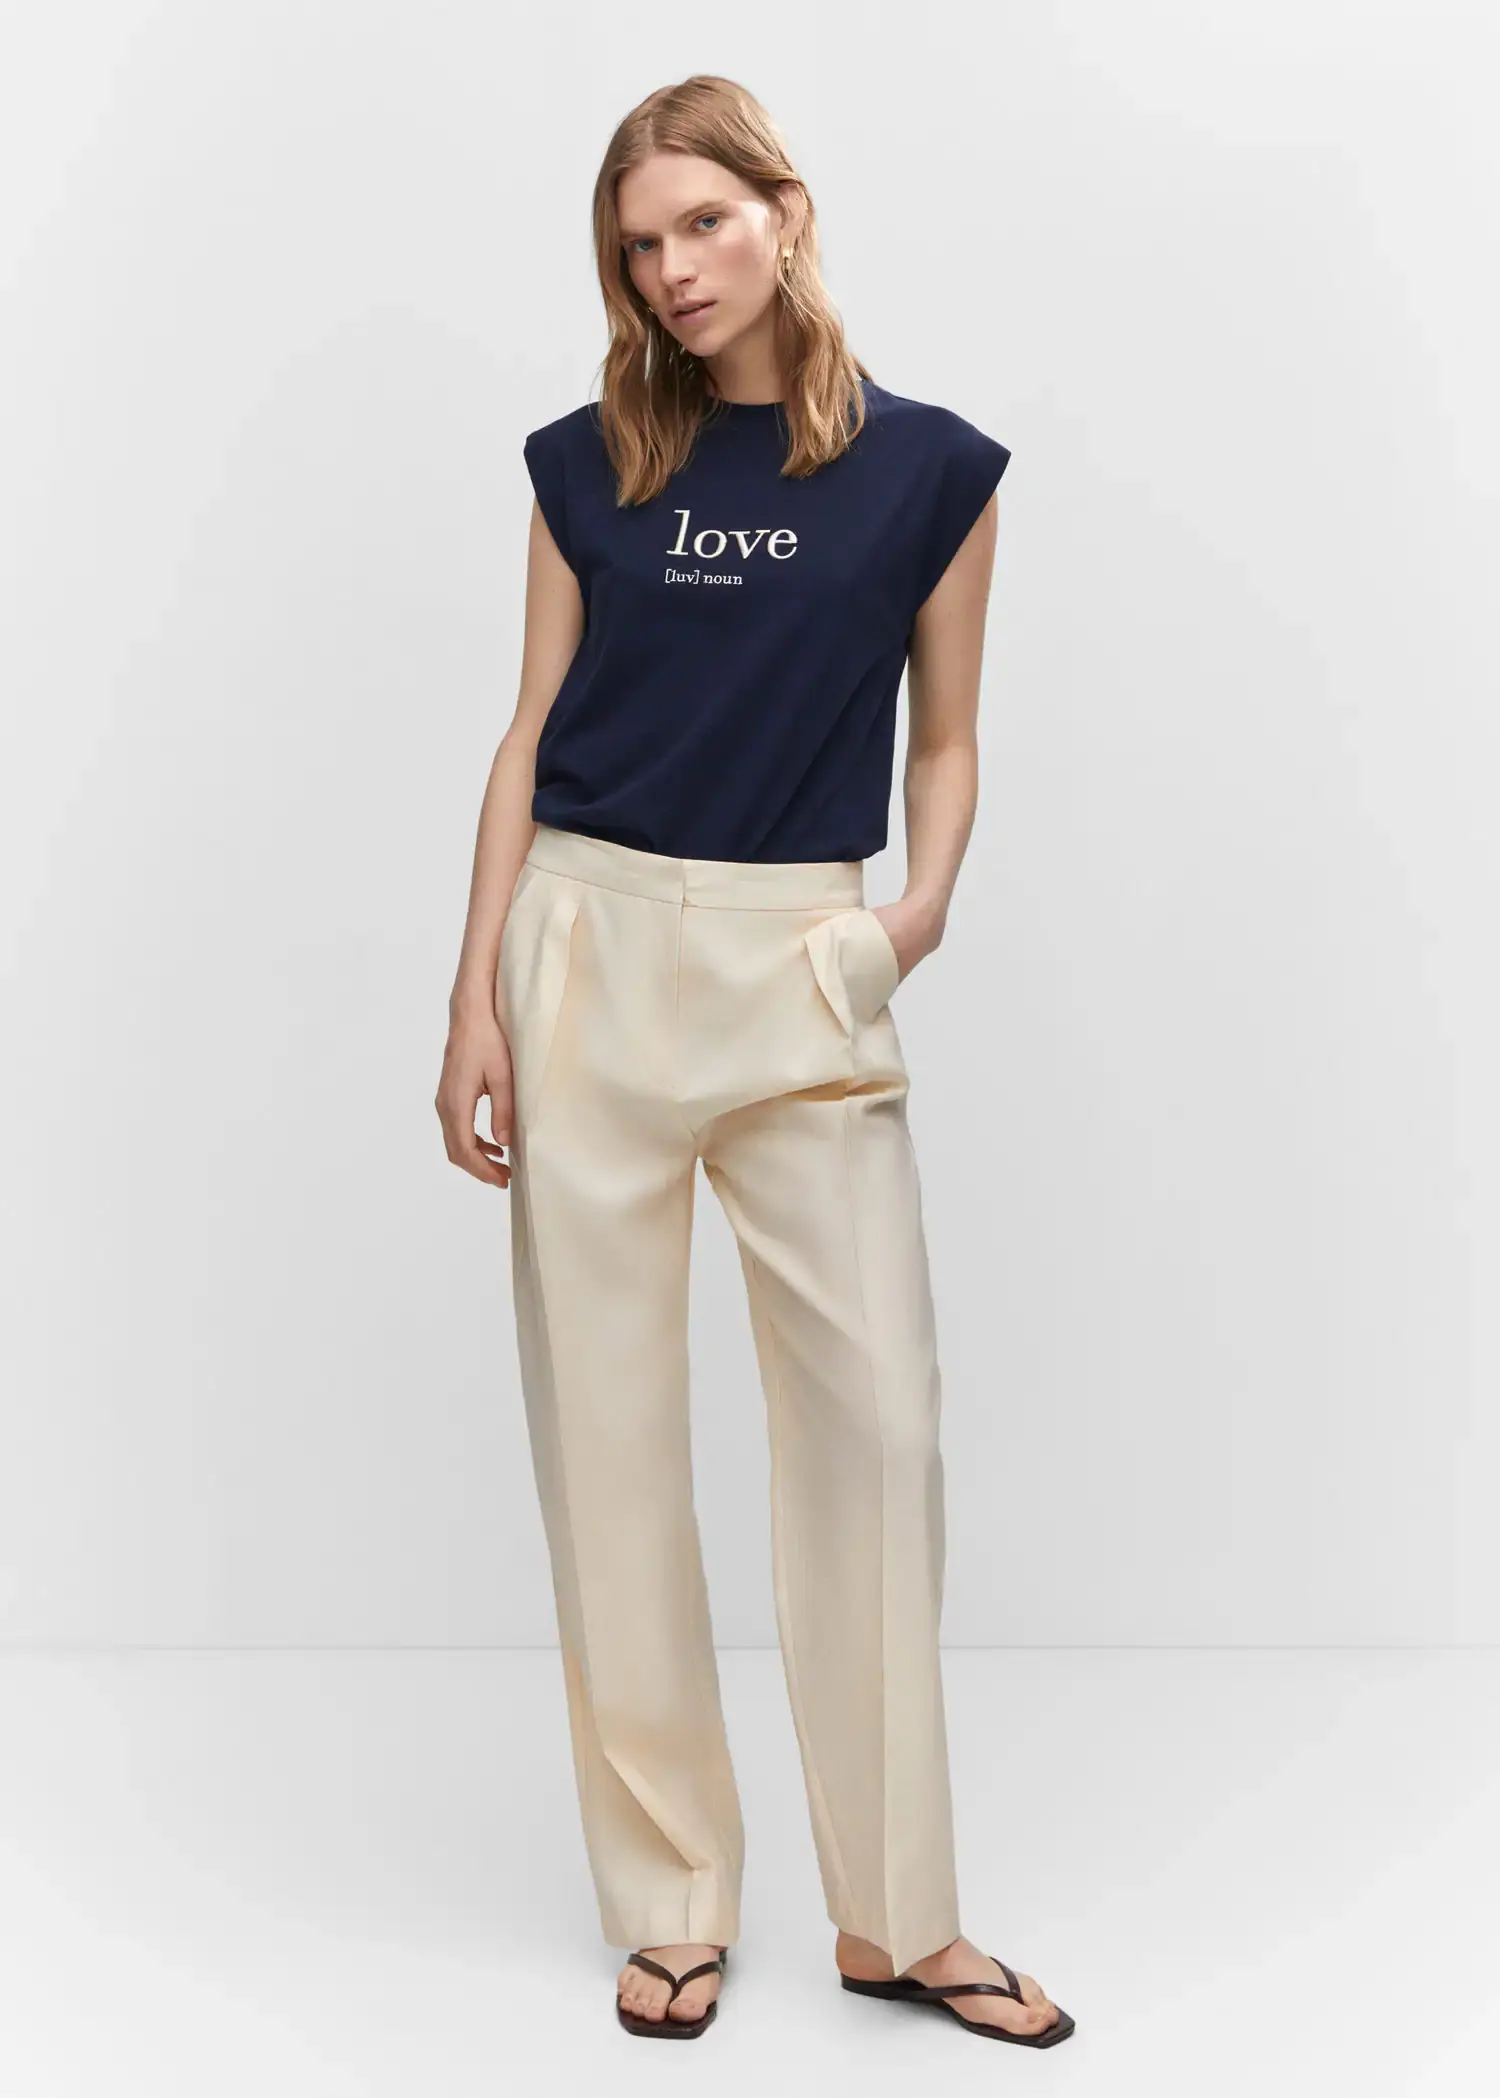 Mango Message cotton T-shirt. a woman in a navy blue shirt and white pants. 